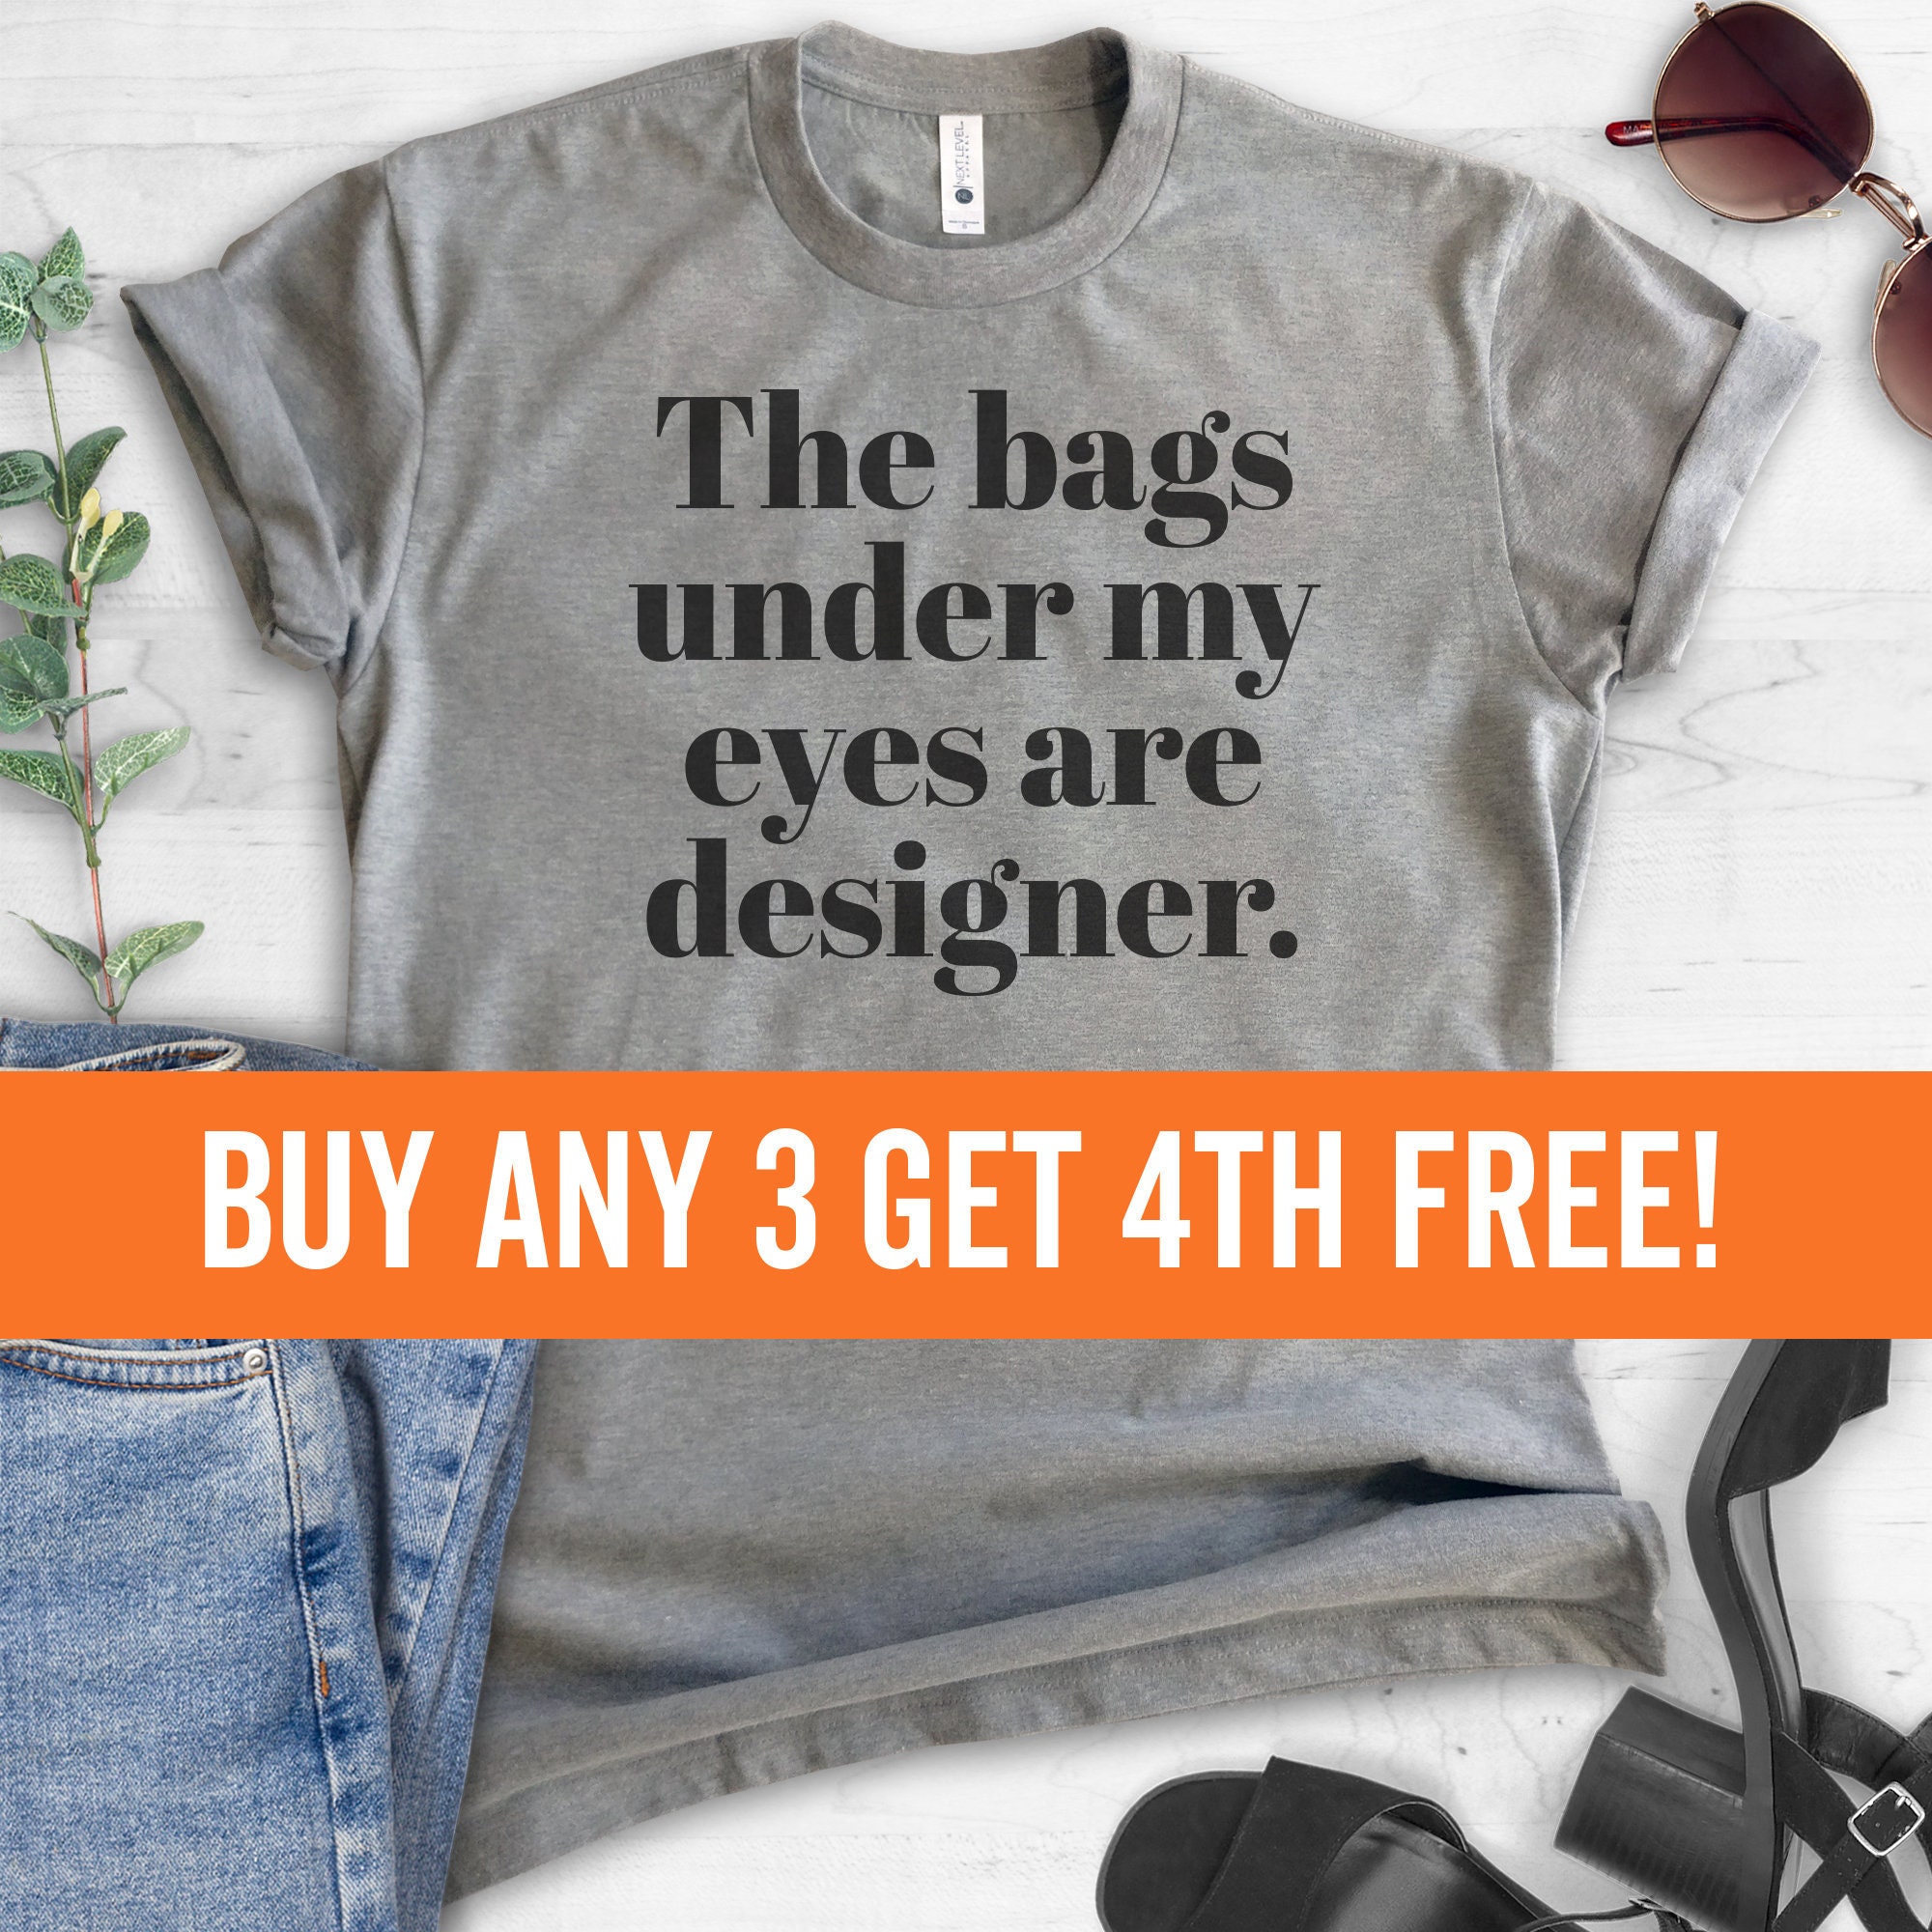 Bags Under My Eyes Designer Funny Fashion Quote Tote Bag by EnvyArt